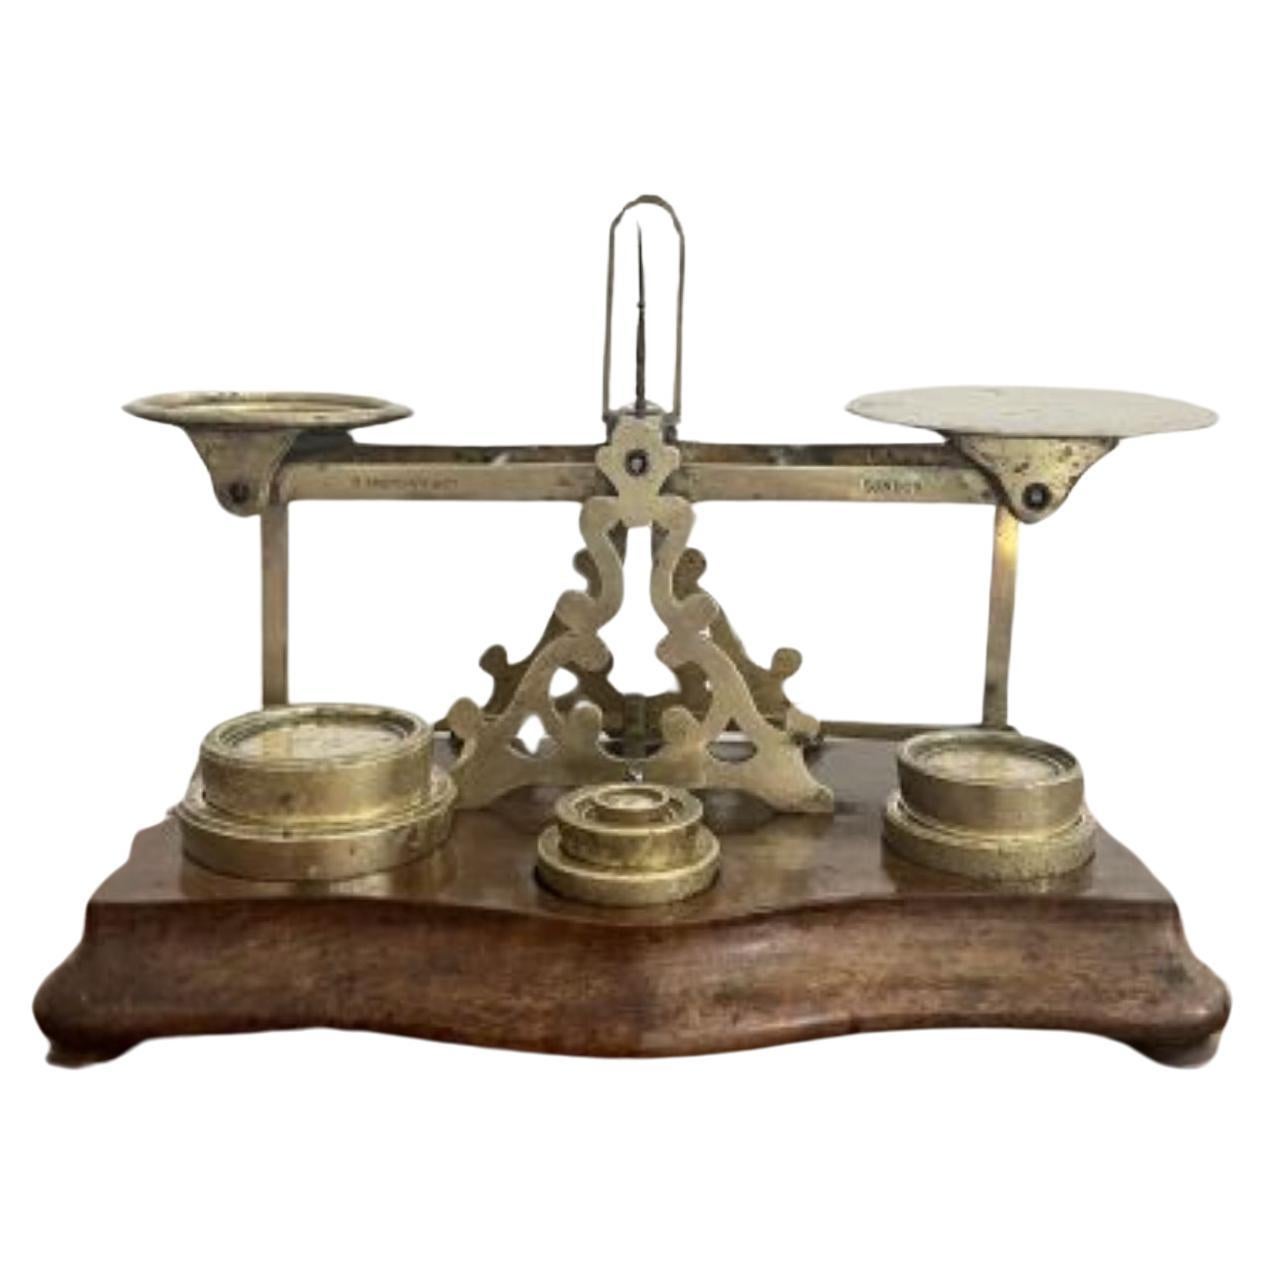 Fantastic set of large antique Victorian postal scales and weights by S.Mordan